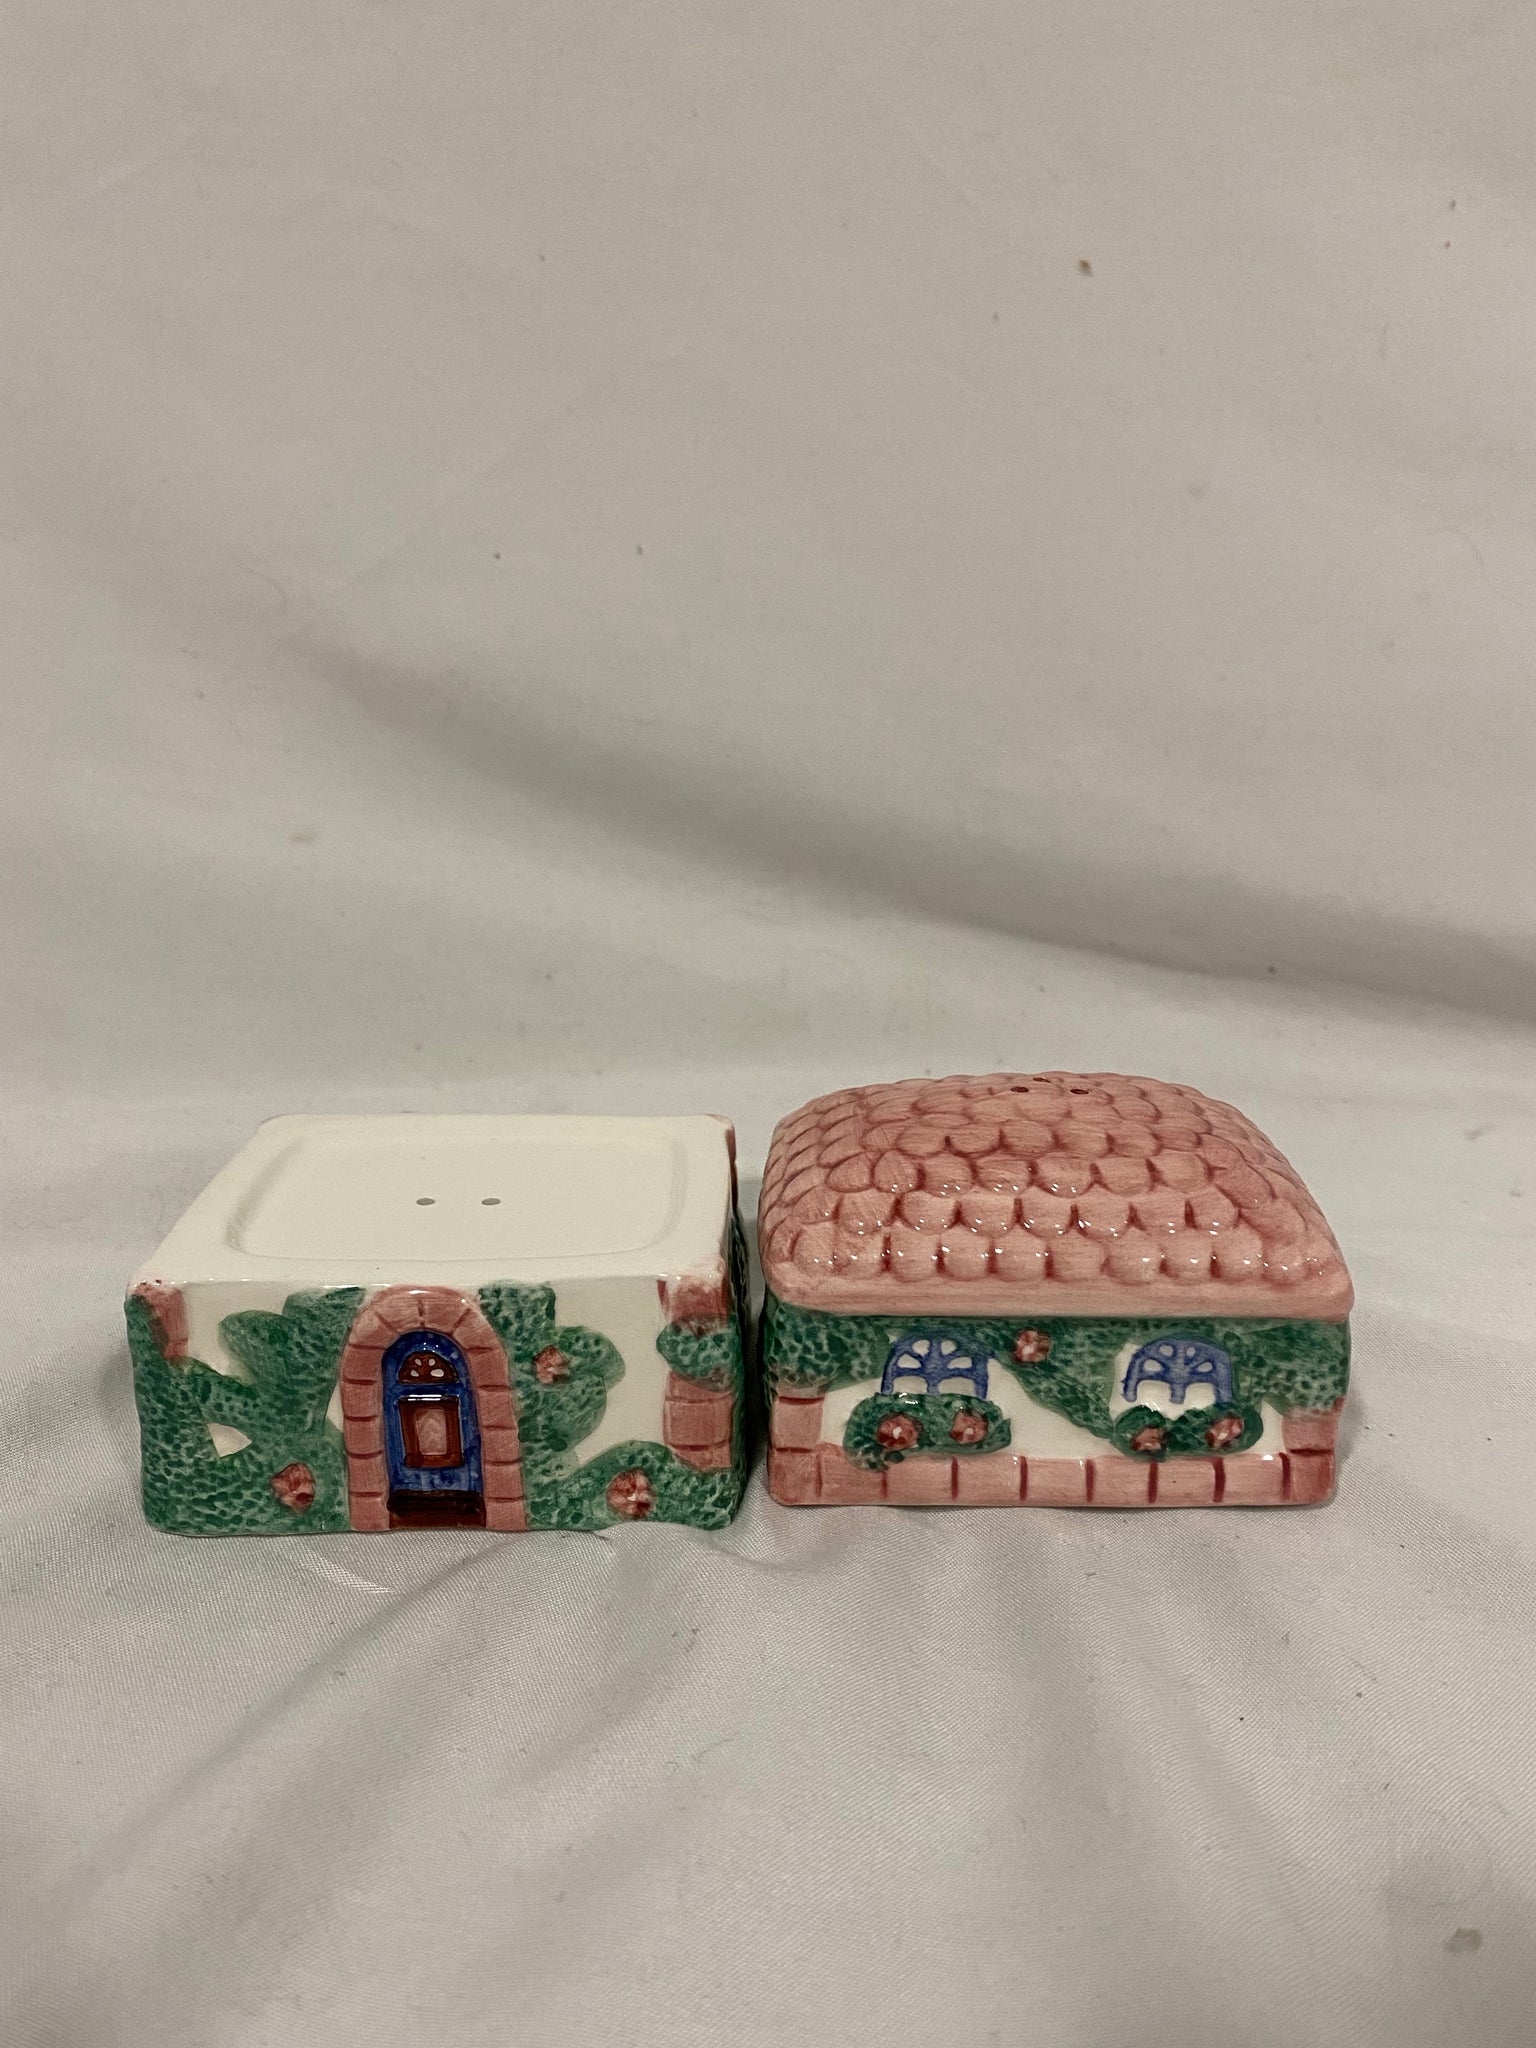 Brand new Avon Victoria Village spice houses & Country Cottage collection